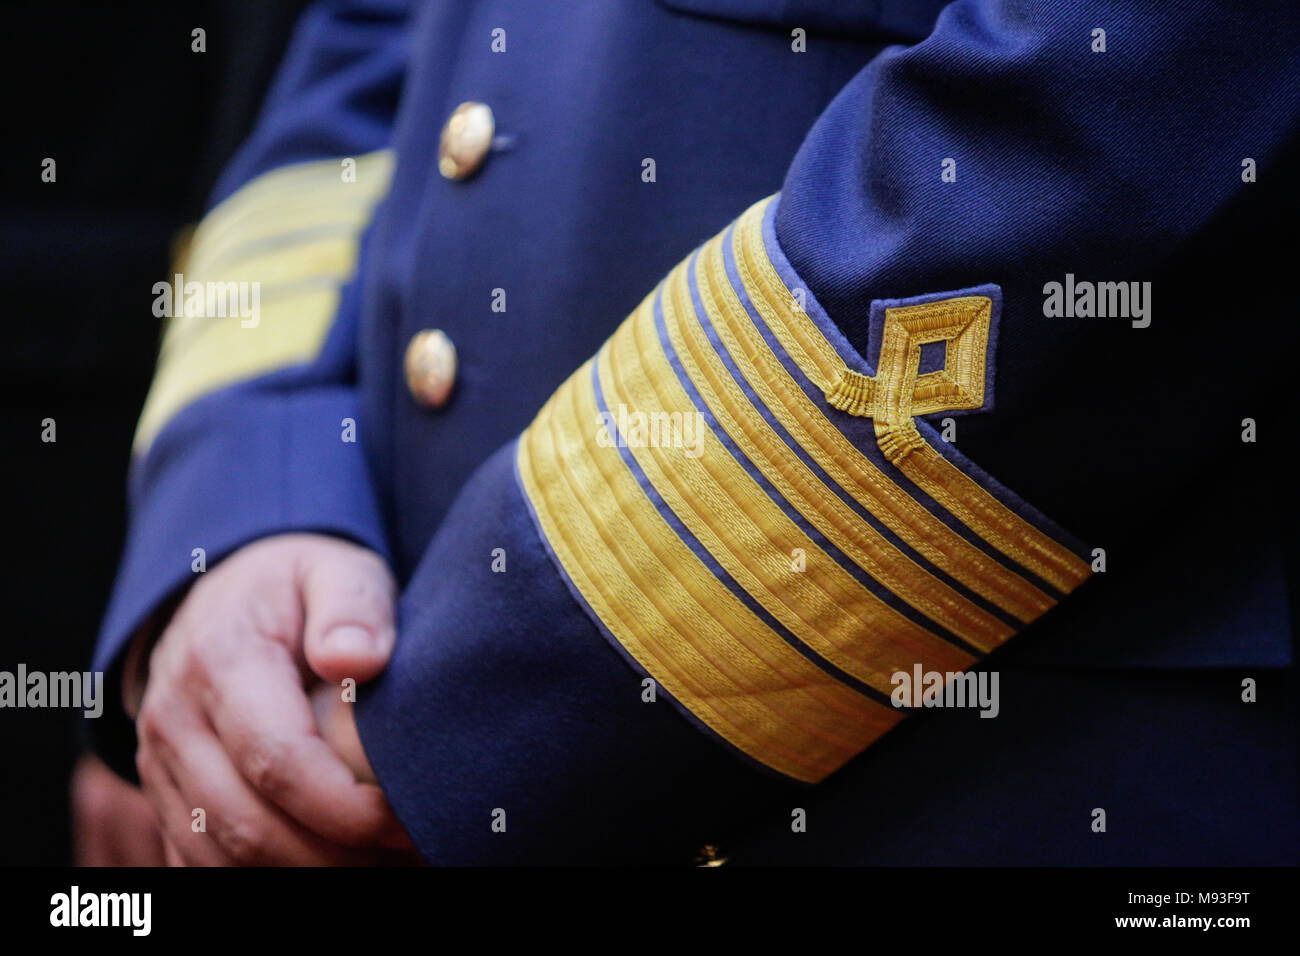 Military insignia on the uniform of a Romanian Army officer Stock Photo